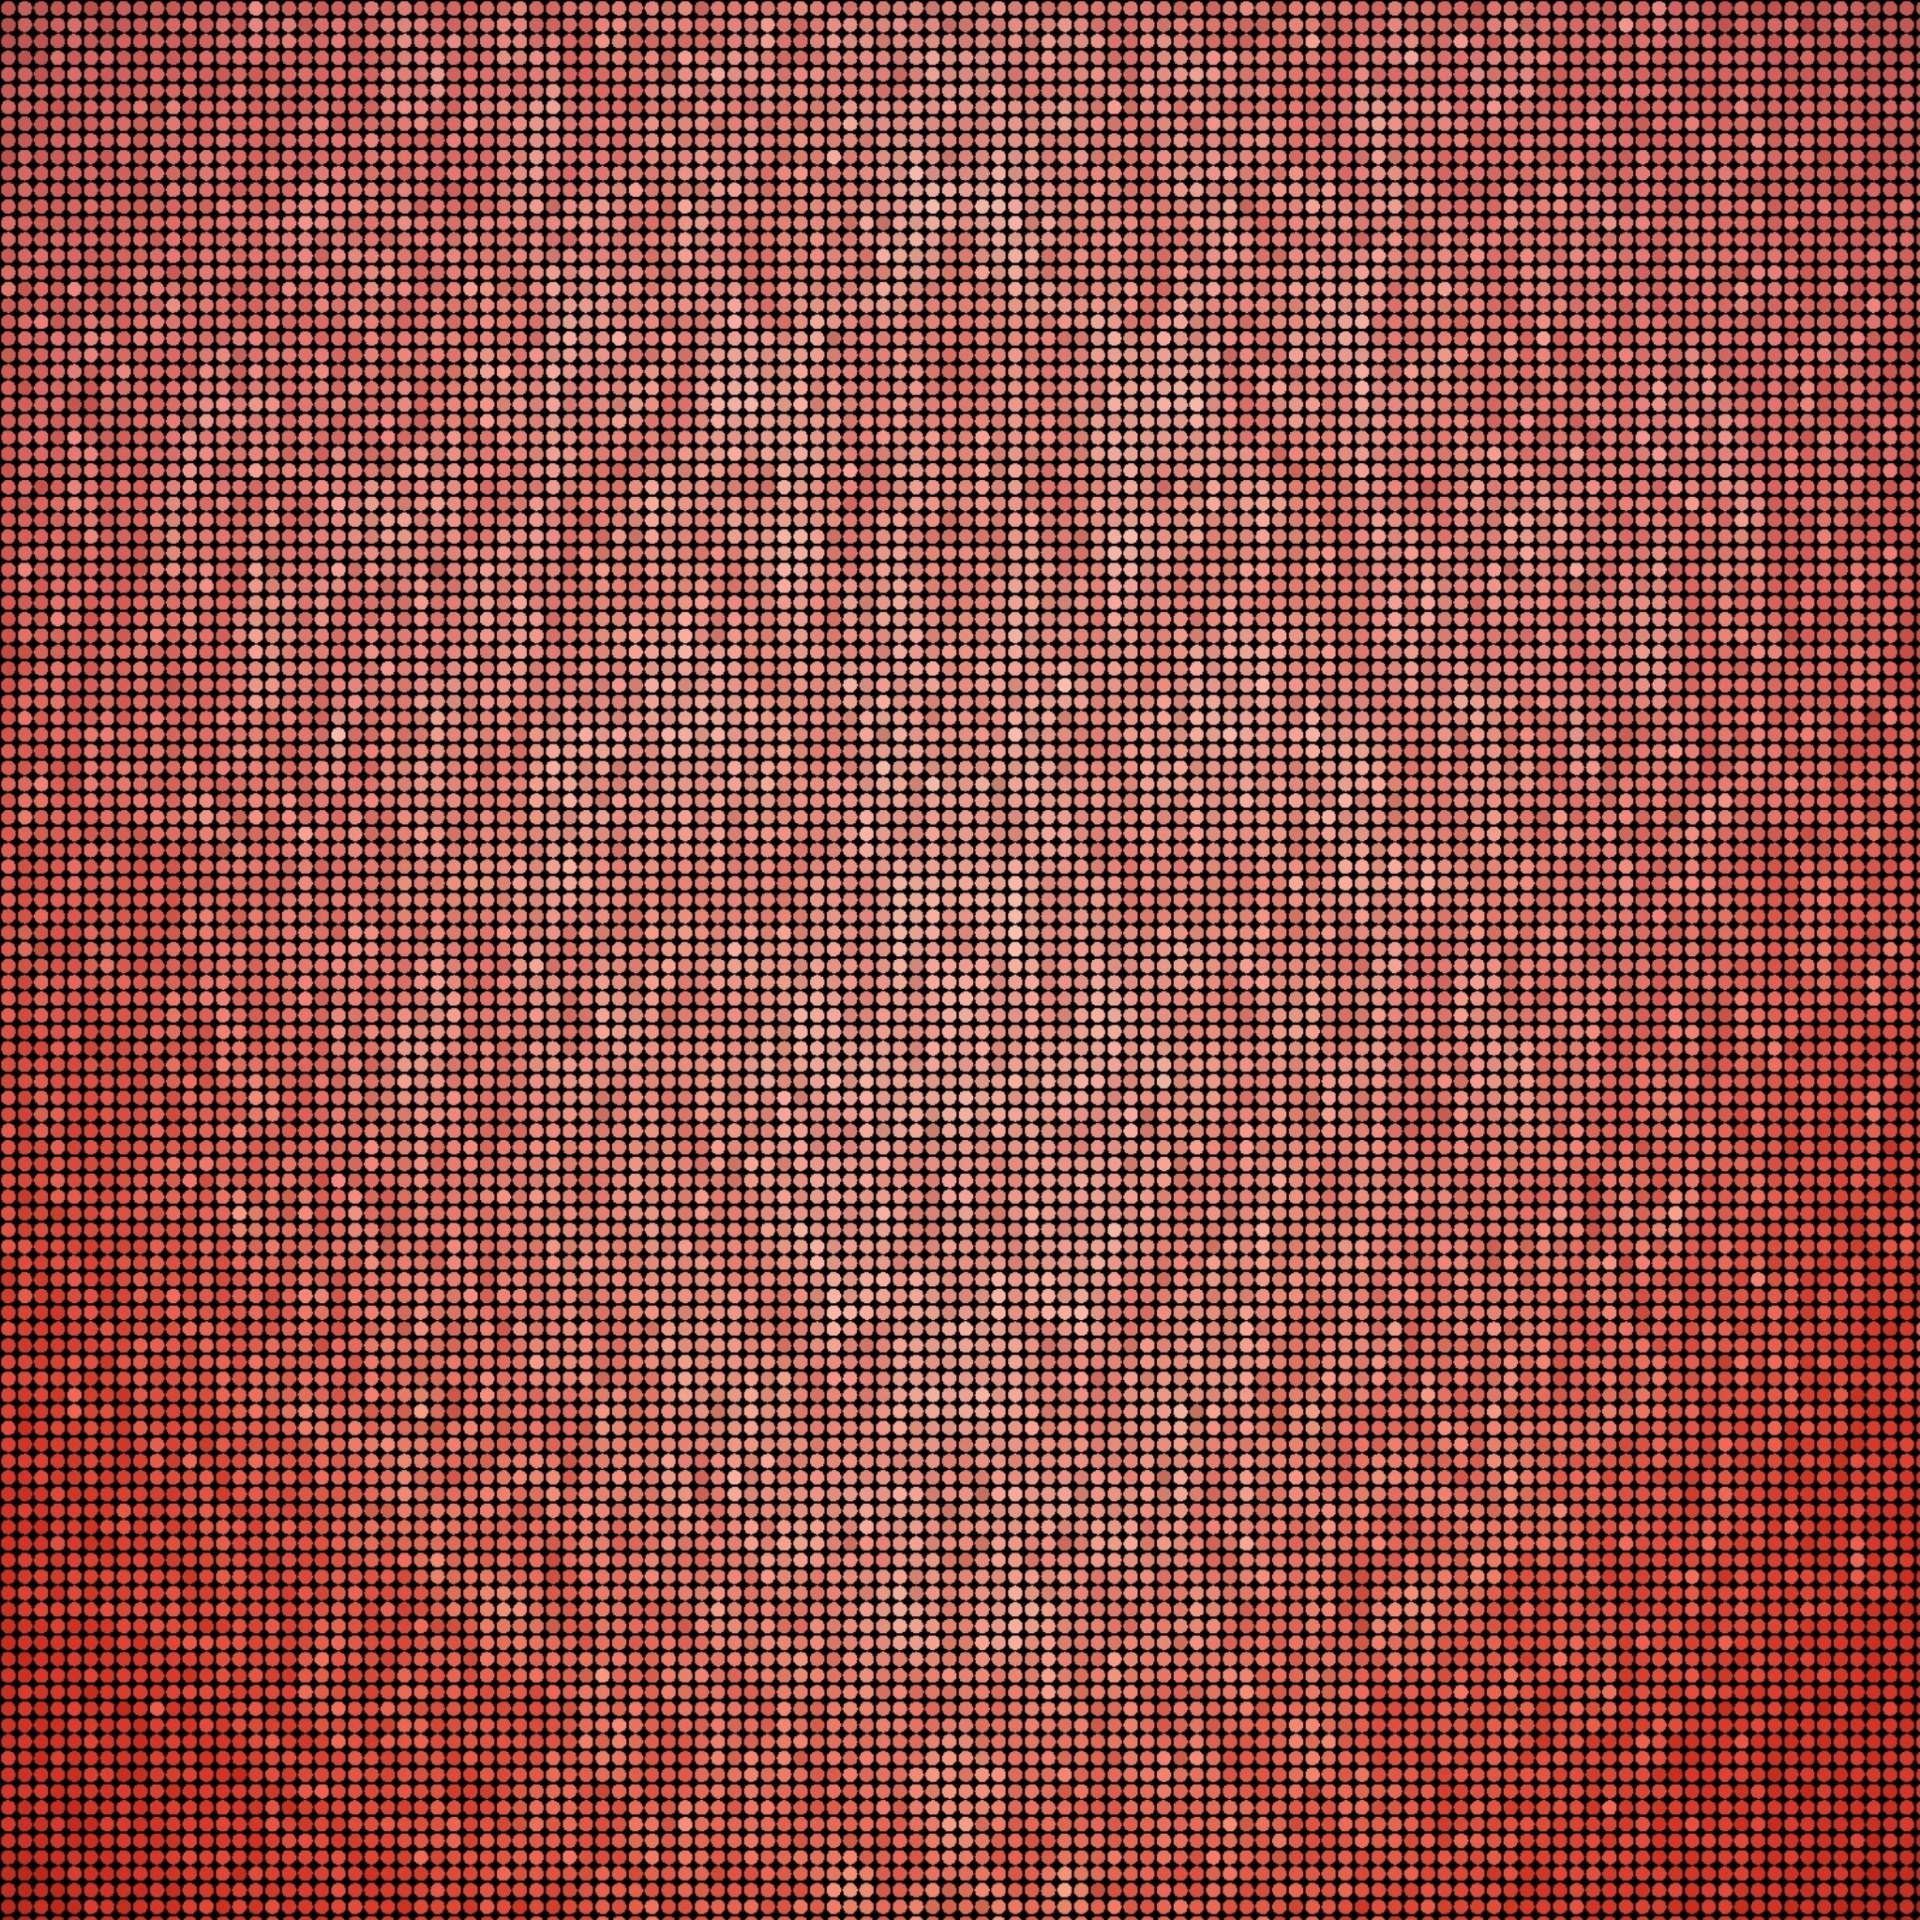 red grid background free photo